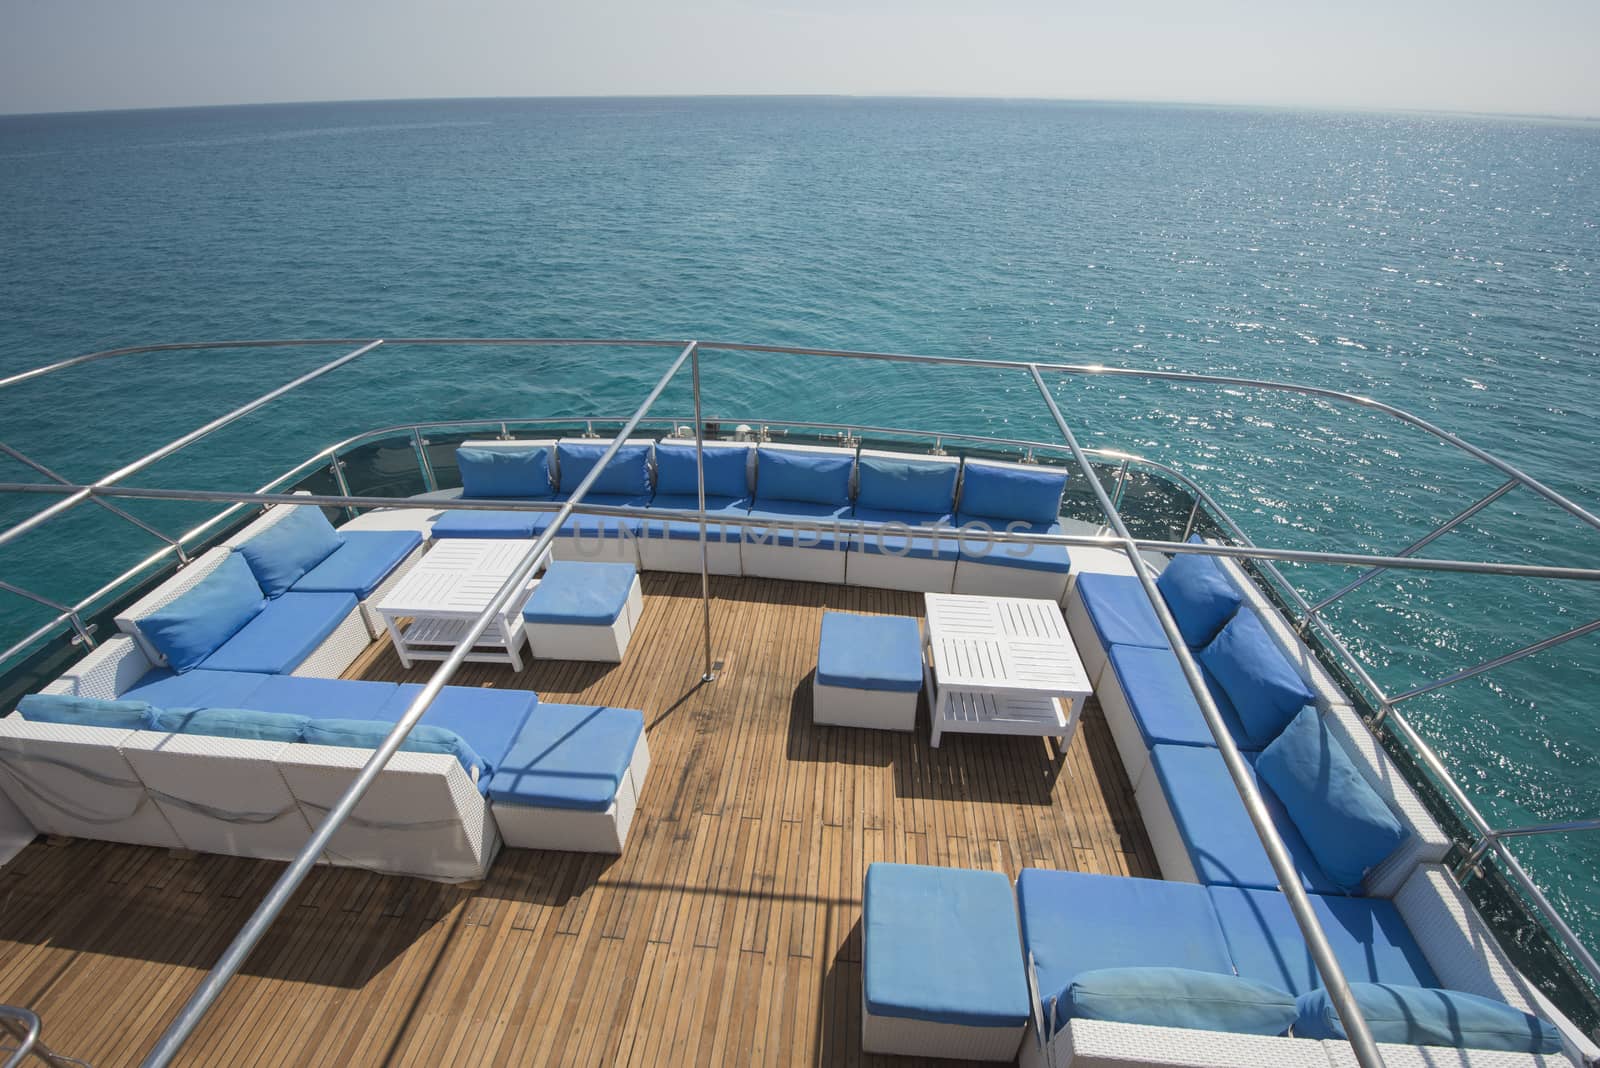 Rear teak deck of a large luxury motor yacht with chairs sofa table and tropical sea view background